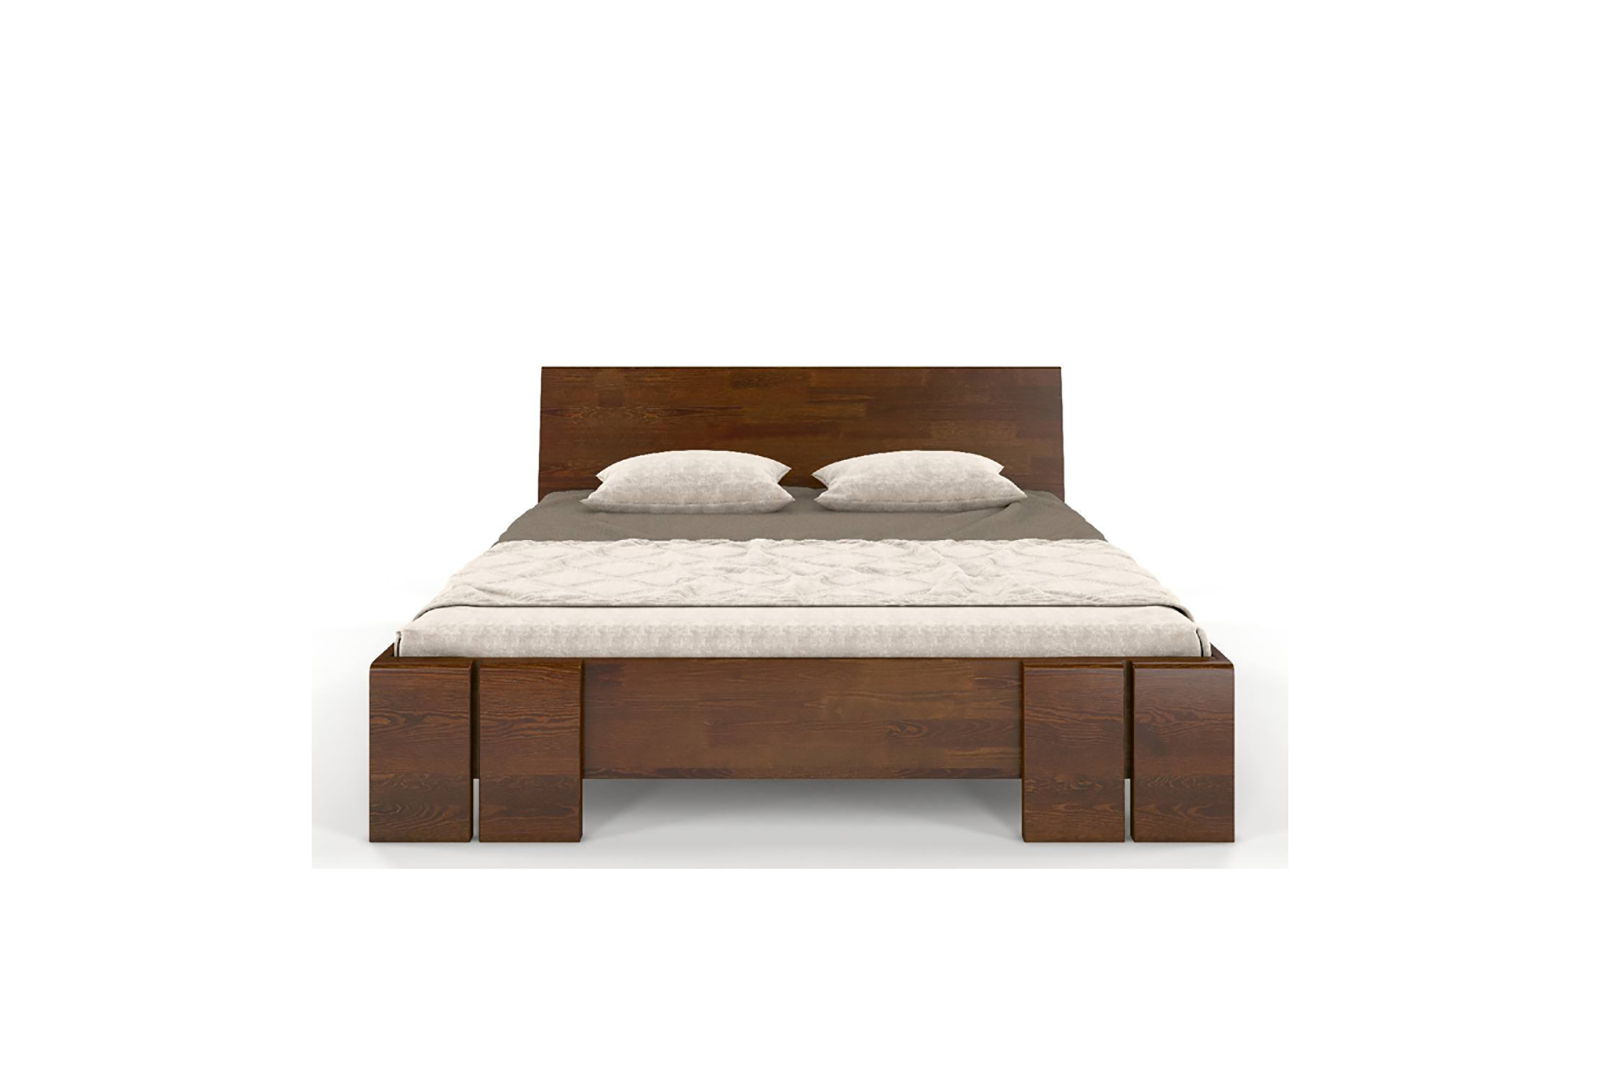 WOODEN PINE BED WITH A BOX FOR BEDDING SKANDICA VESTRE MAXI AND ST